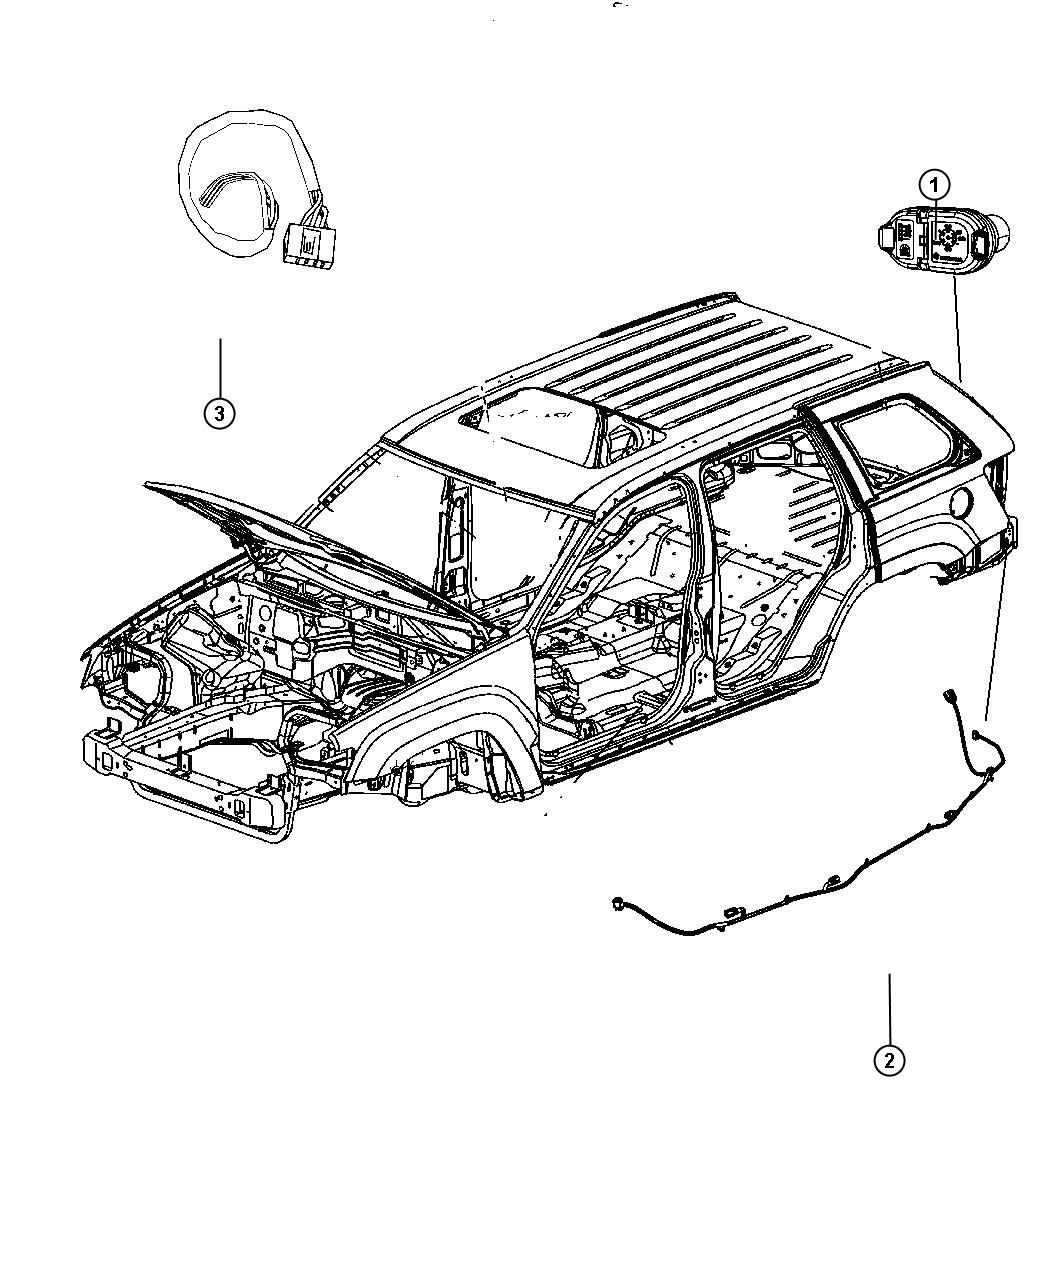 Wiring Chasis and Underbody. Diagram